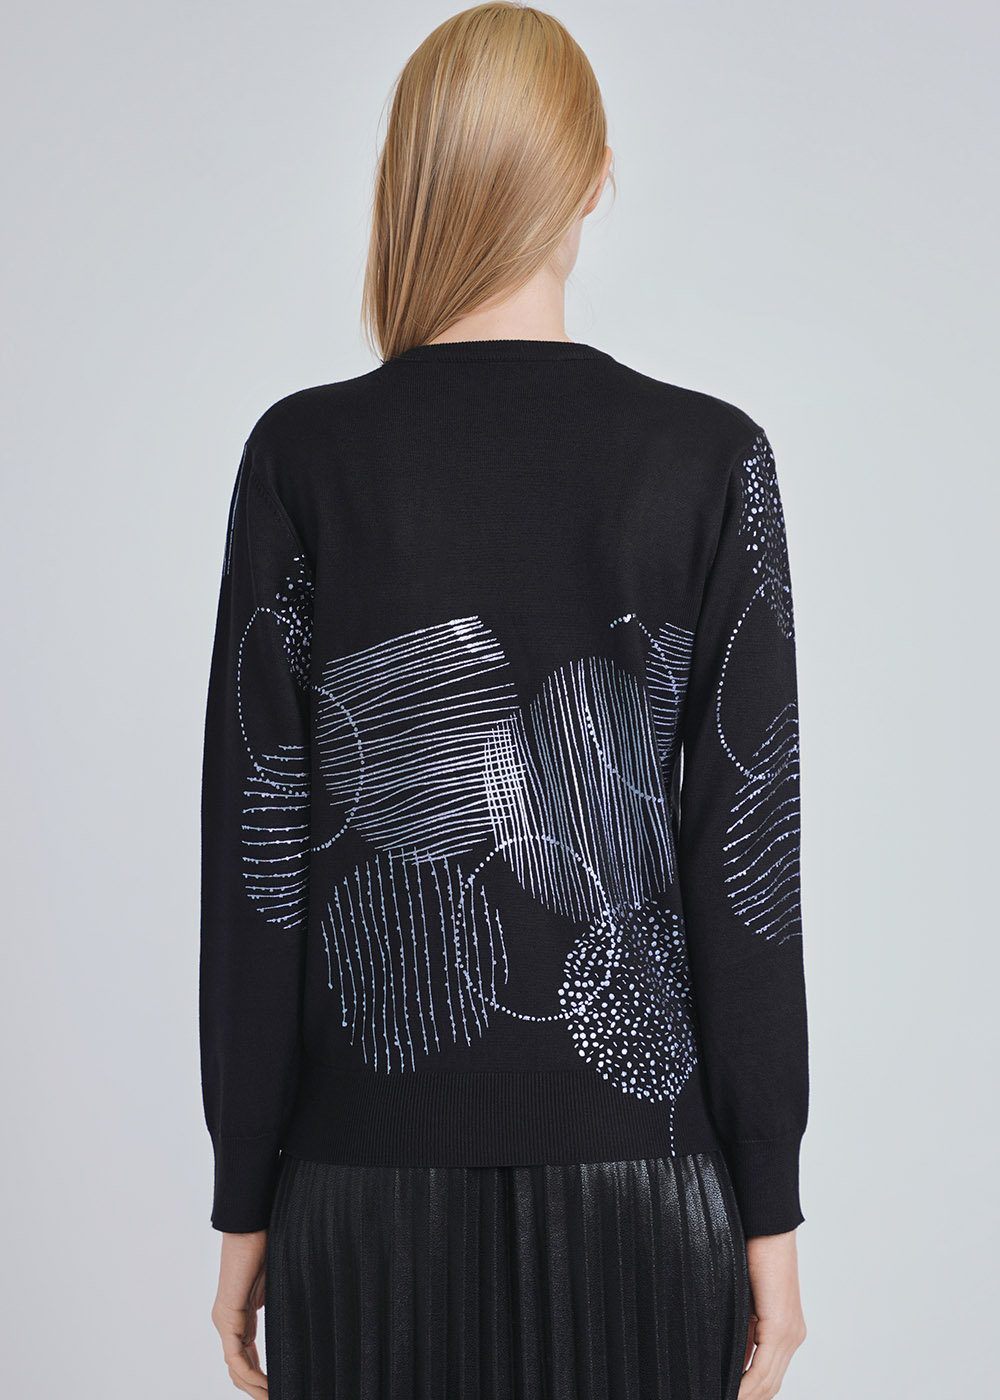 Black Sweater with Captivating Blue Print Accent